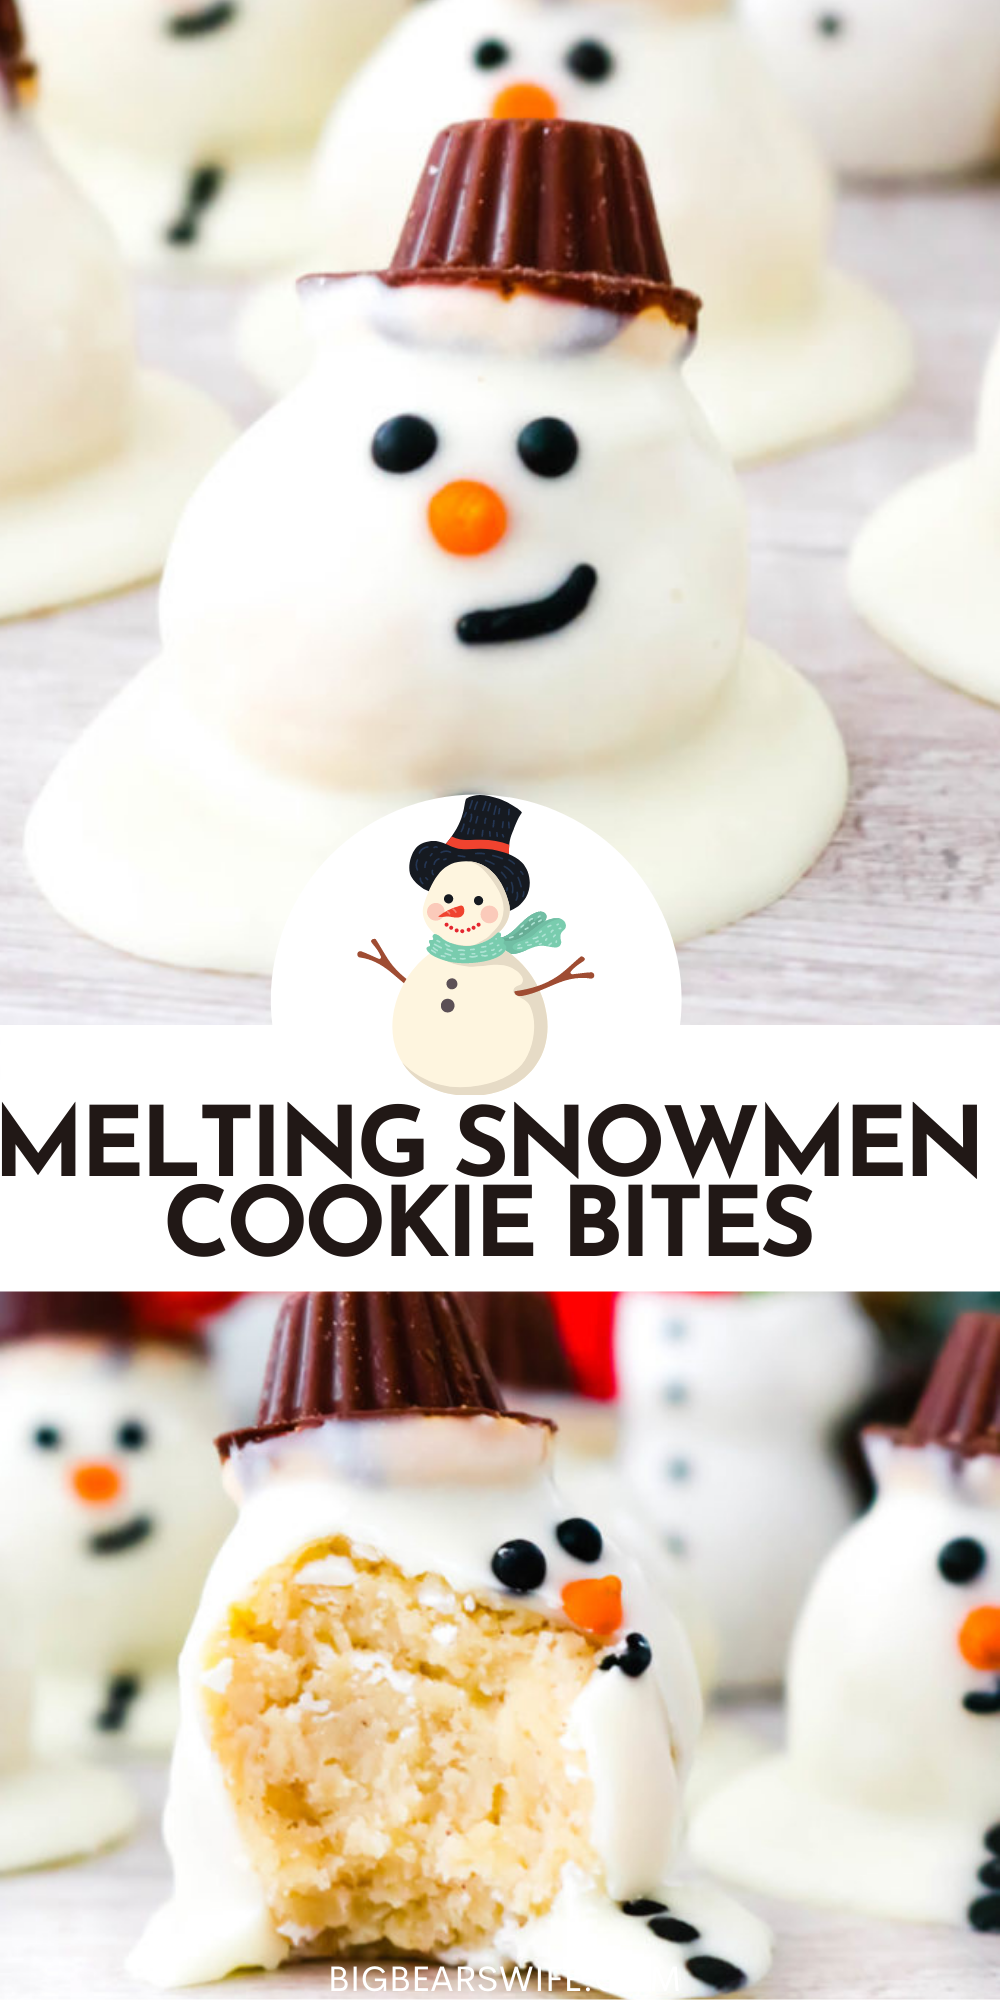 This adorable dessert is actually homemade snickerdoodles rolled into balls and coated with white chocolate to look like a cute melting snowman. Get the kids involved with this one. This easy recipe can be mastered by chefs of all ages. One part cookie, one part candy, and one part edible art! Melting Snowmen Cookie Bites are sure to be a hit at your holiday parties and winter get-togethers! via @bigbearswife